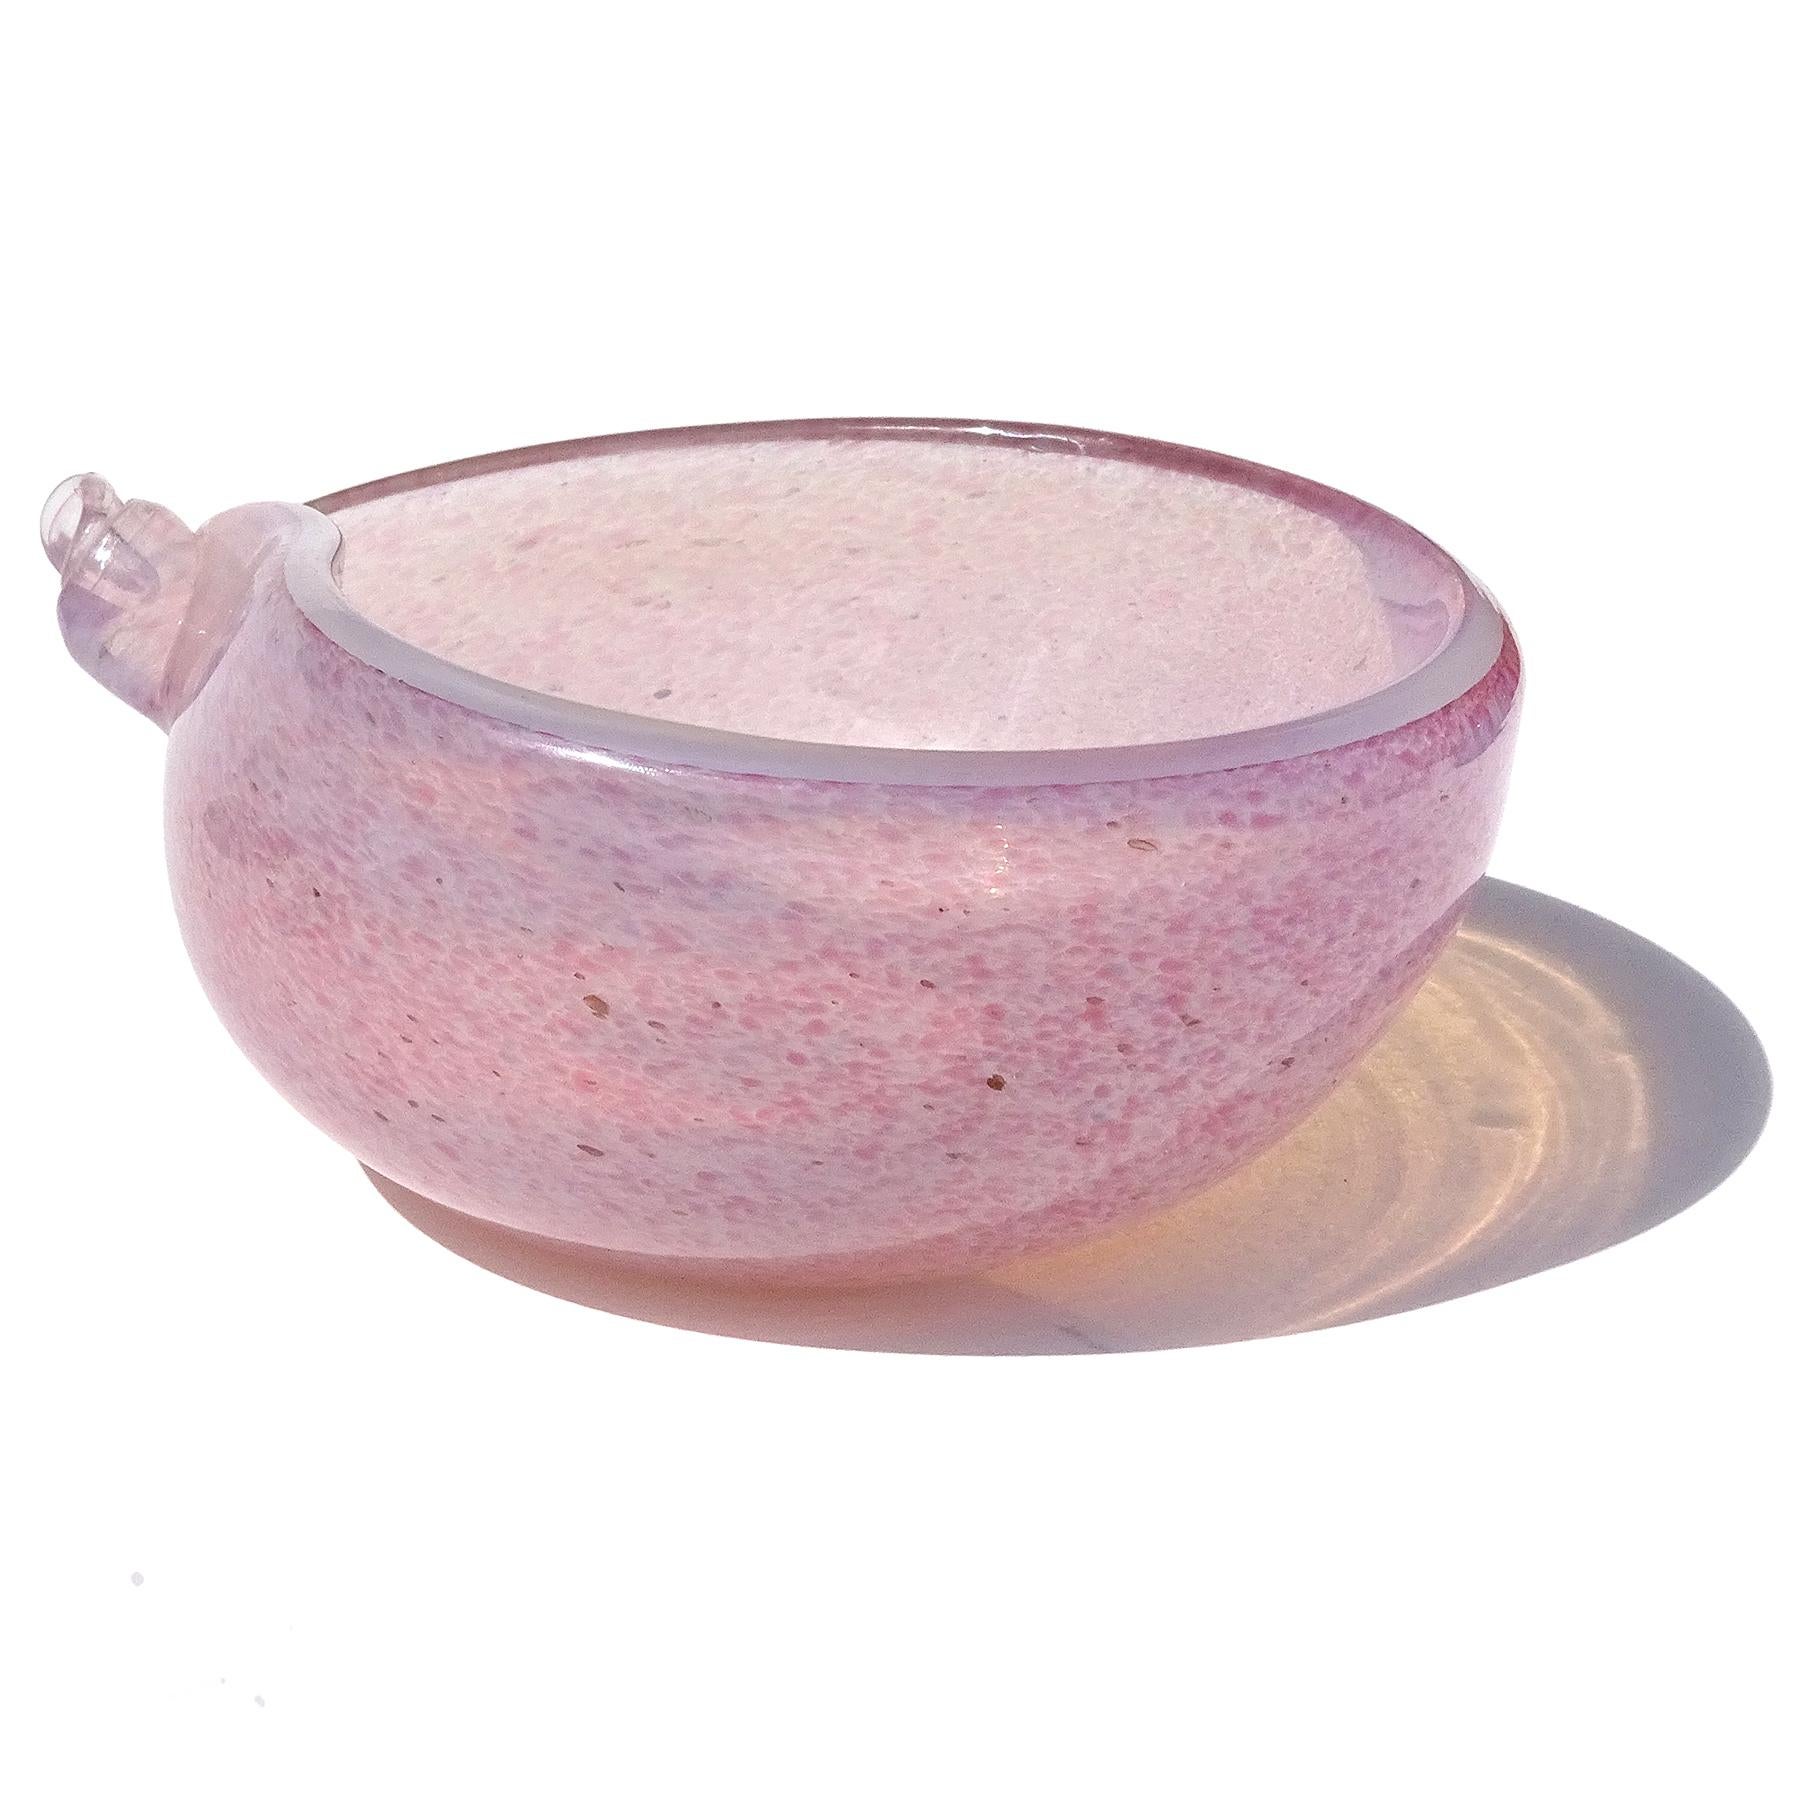 Beautiful vintage Murano hand blown opalescent white and pink spots Italian art glass decorative seashell shape bowl / vide-poche. It has been attributed to the Fratelli Toso company. The bowl has an inner layer of transparent white opal glass,